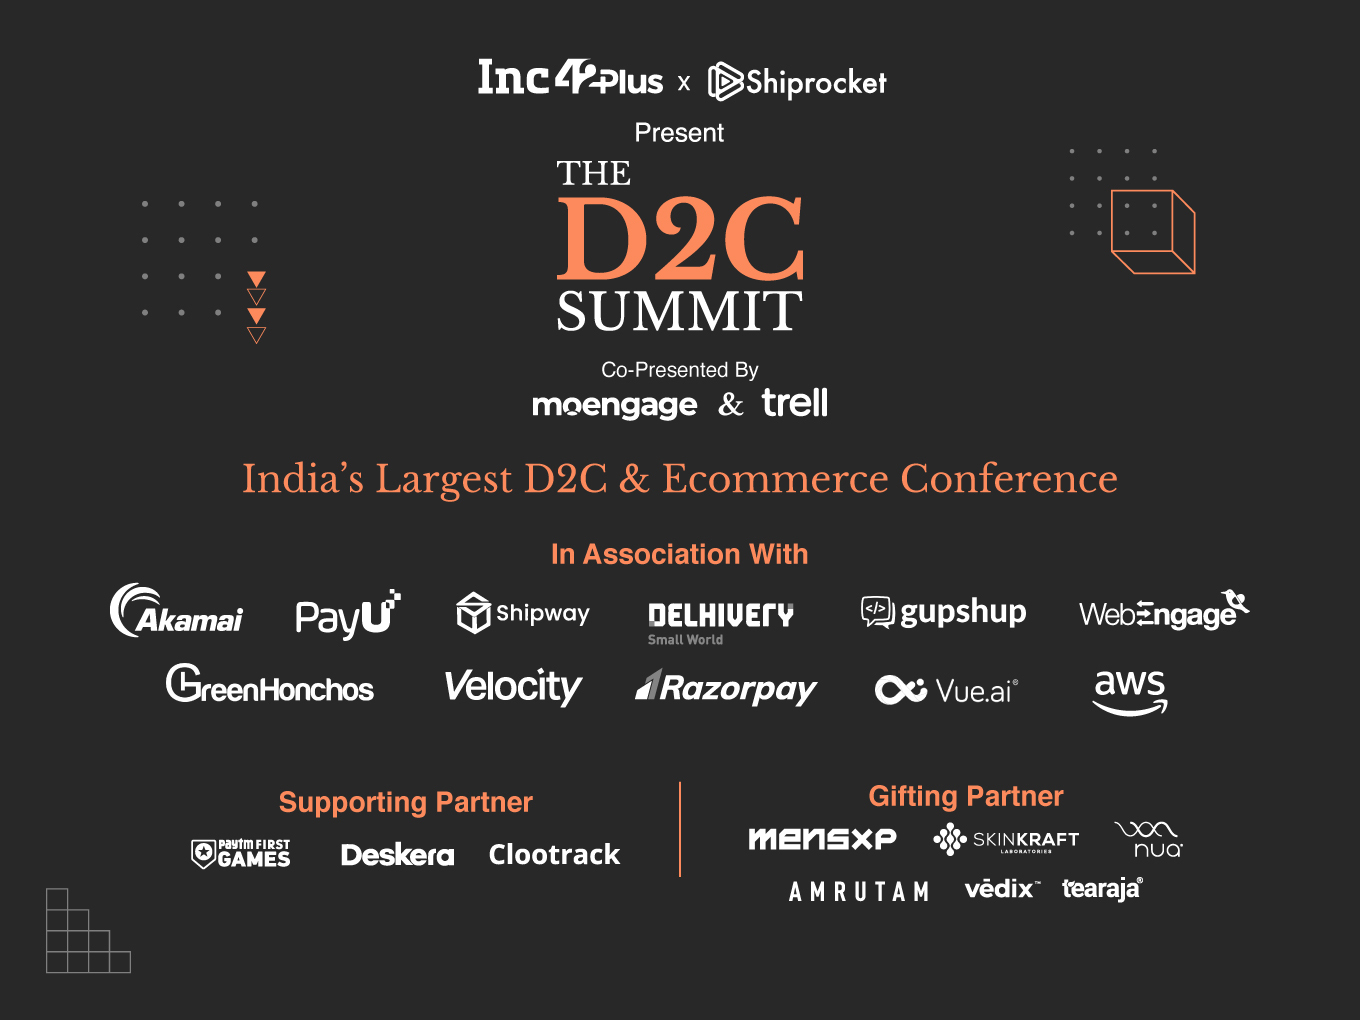 Thank You, Sponsors And Partners For Making The D2C Summit A Monumental Success!